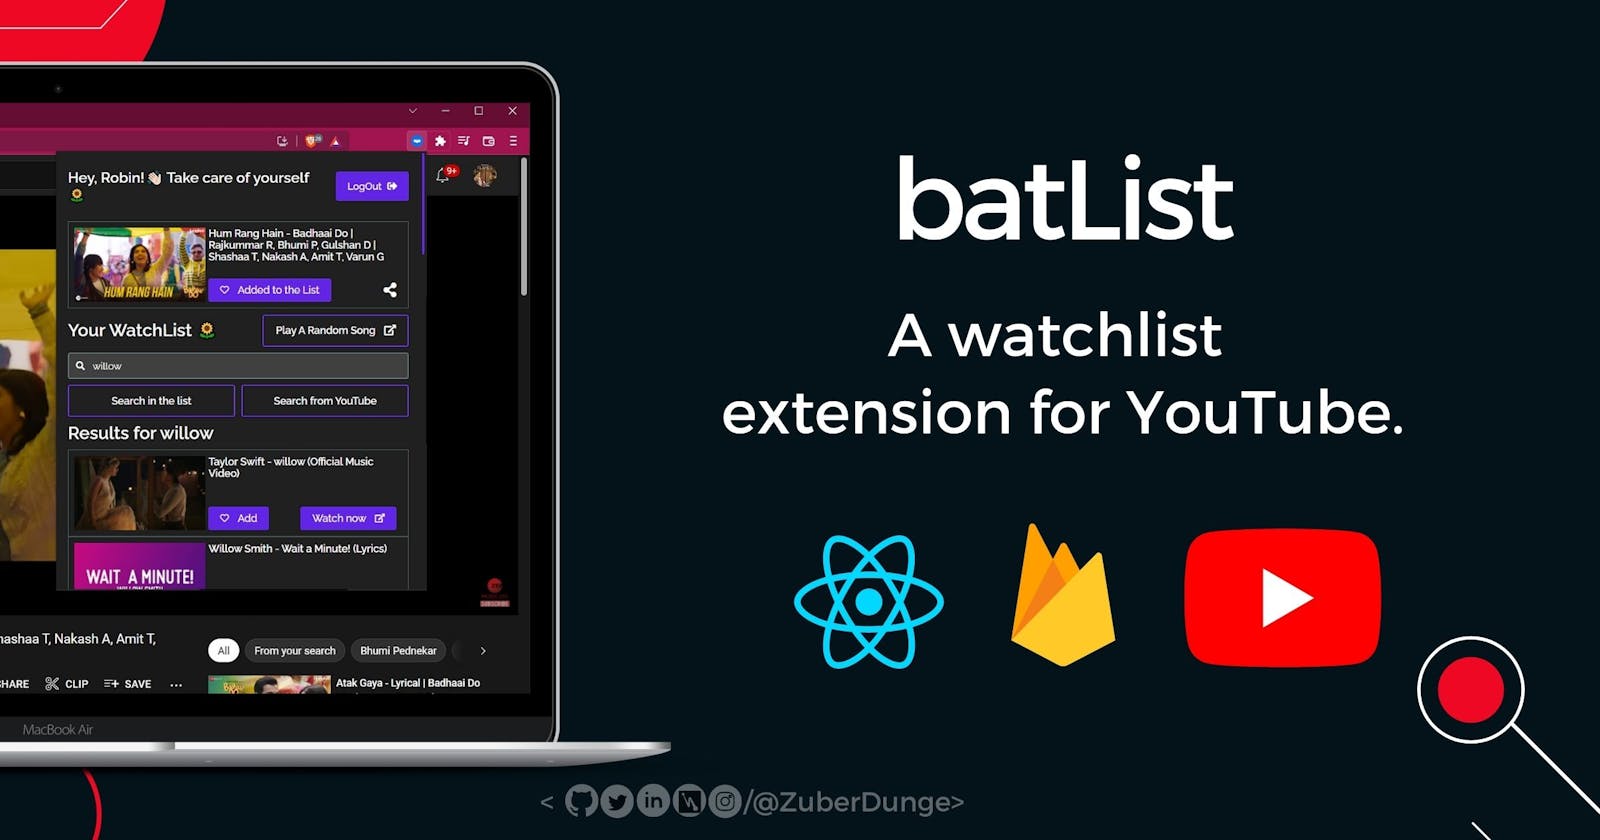 batList - A watchlist extension for YouTube using ReactJS, Firebase, and YouTube API.